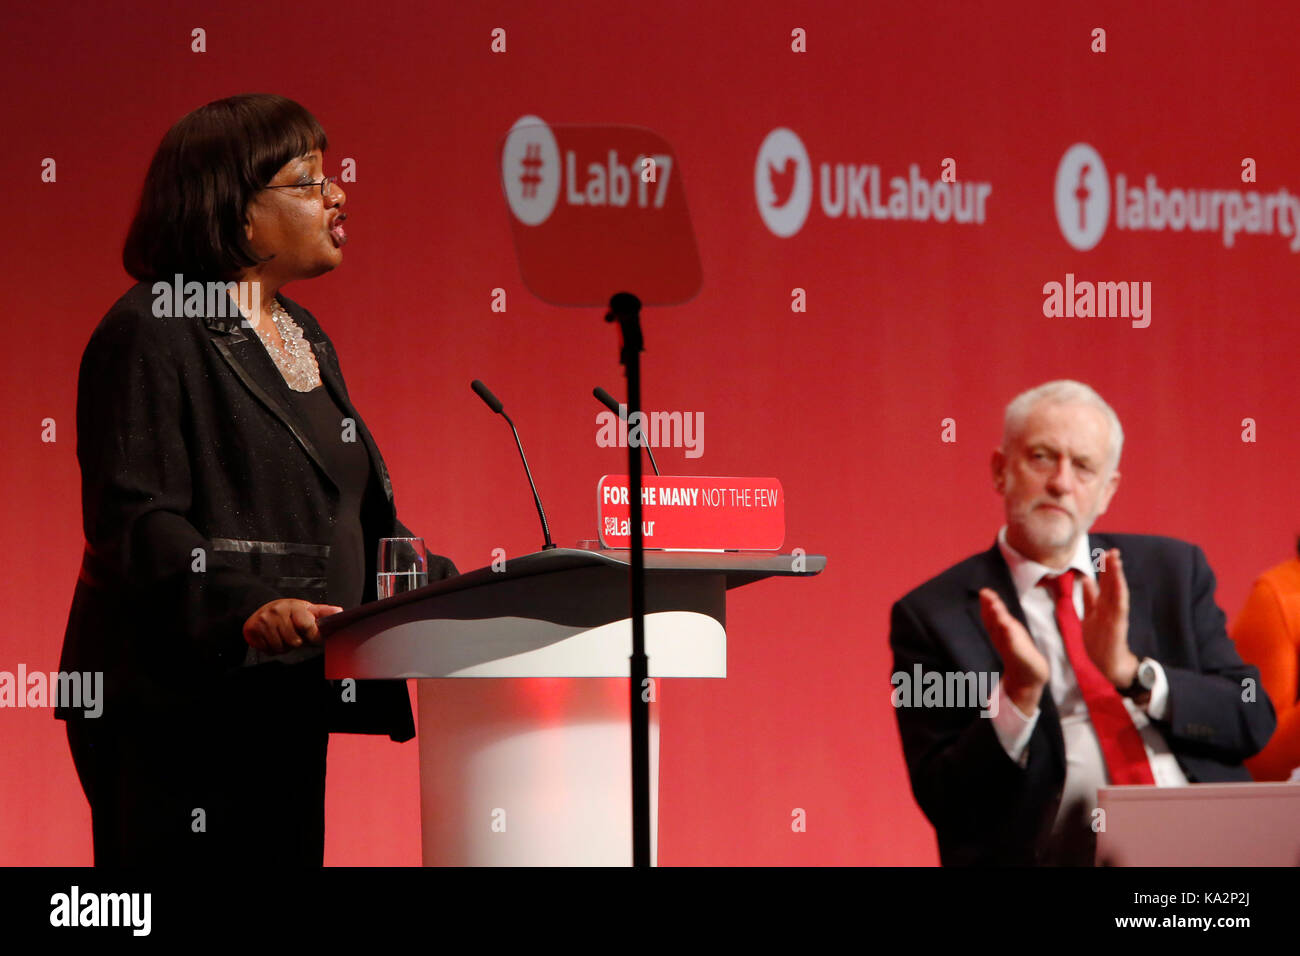 Brighton, UK. 24th September, 2017. Jeremy Corbyn, leader of Britain's opposition Labour party listens to Diane Abbott, Shadow Home Secretary, as she makes a speech during the annual Labour Party Conference in Brighton, UK Sunday, September 24, 2017. Photograph : Credit: Luke MacGregor/Alamy Live News Stock Photo